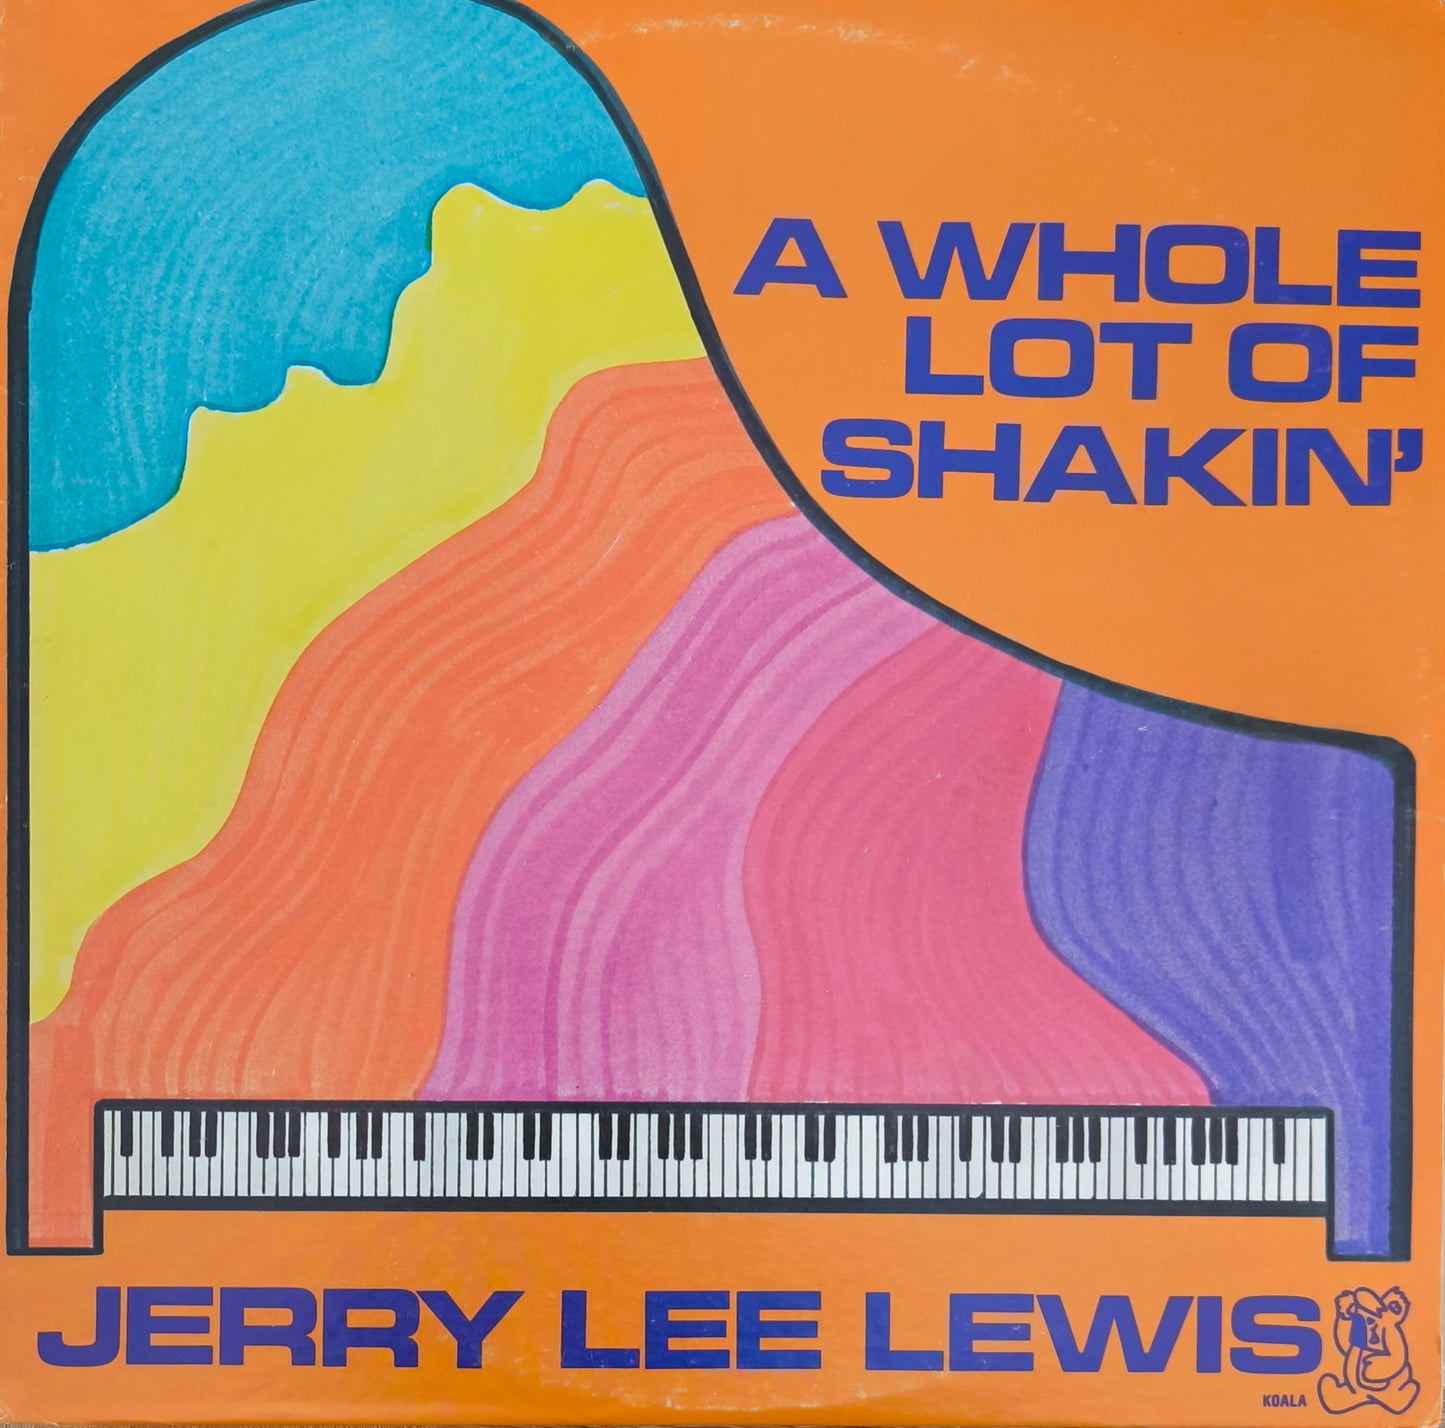 JERRY LEE LEWIS - A Whole Lot Of Shakin'